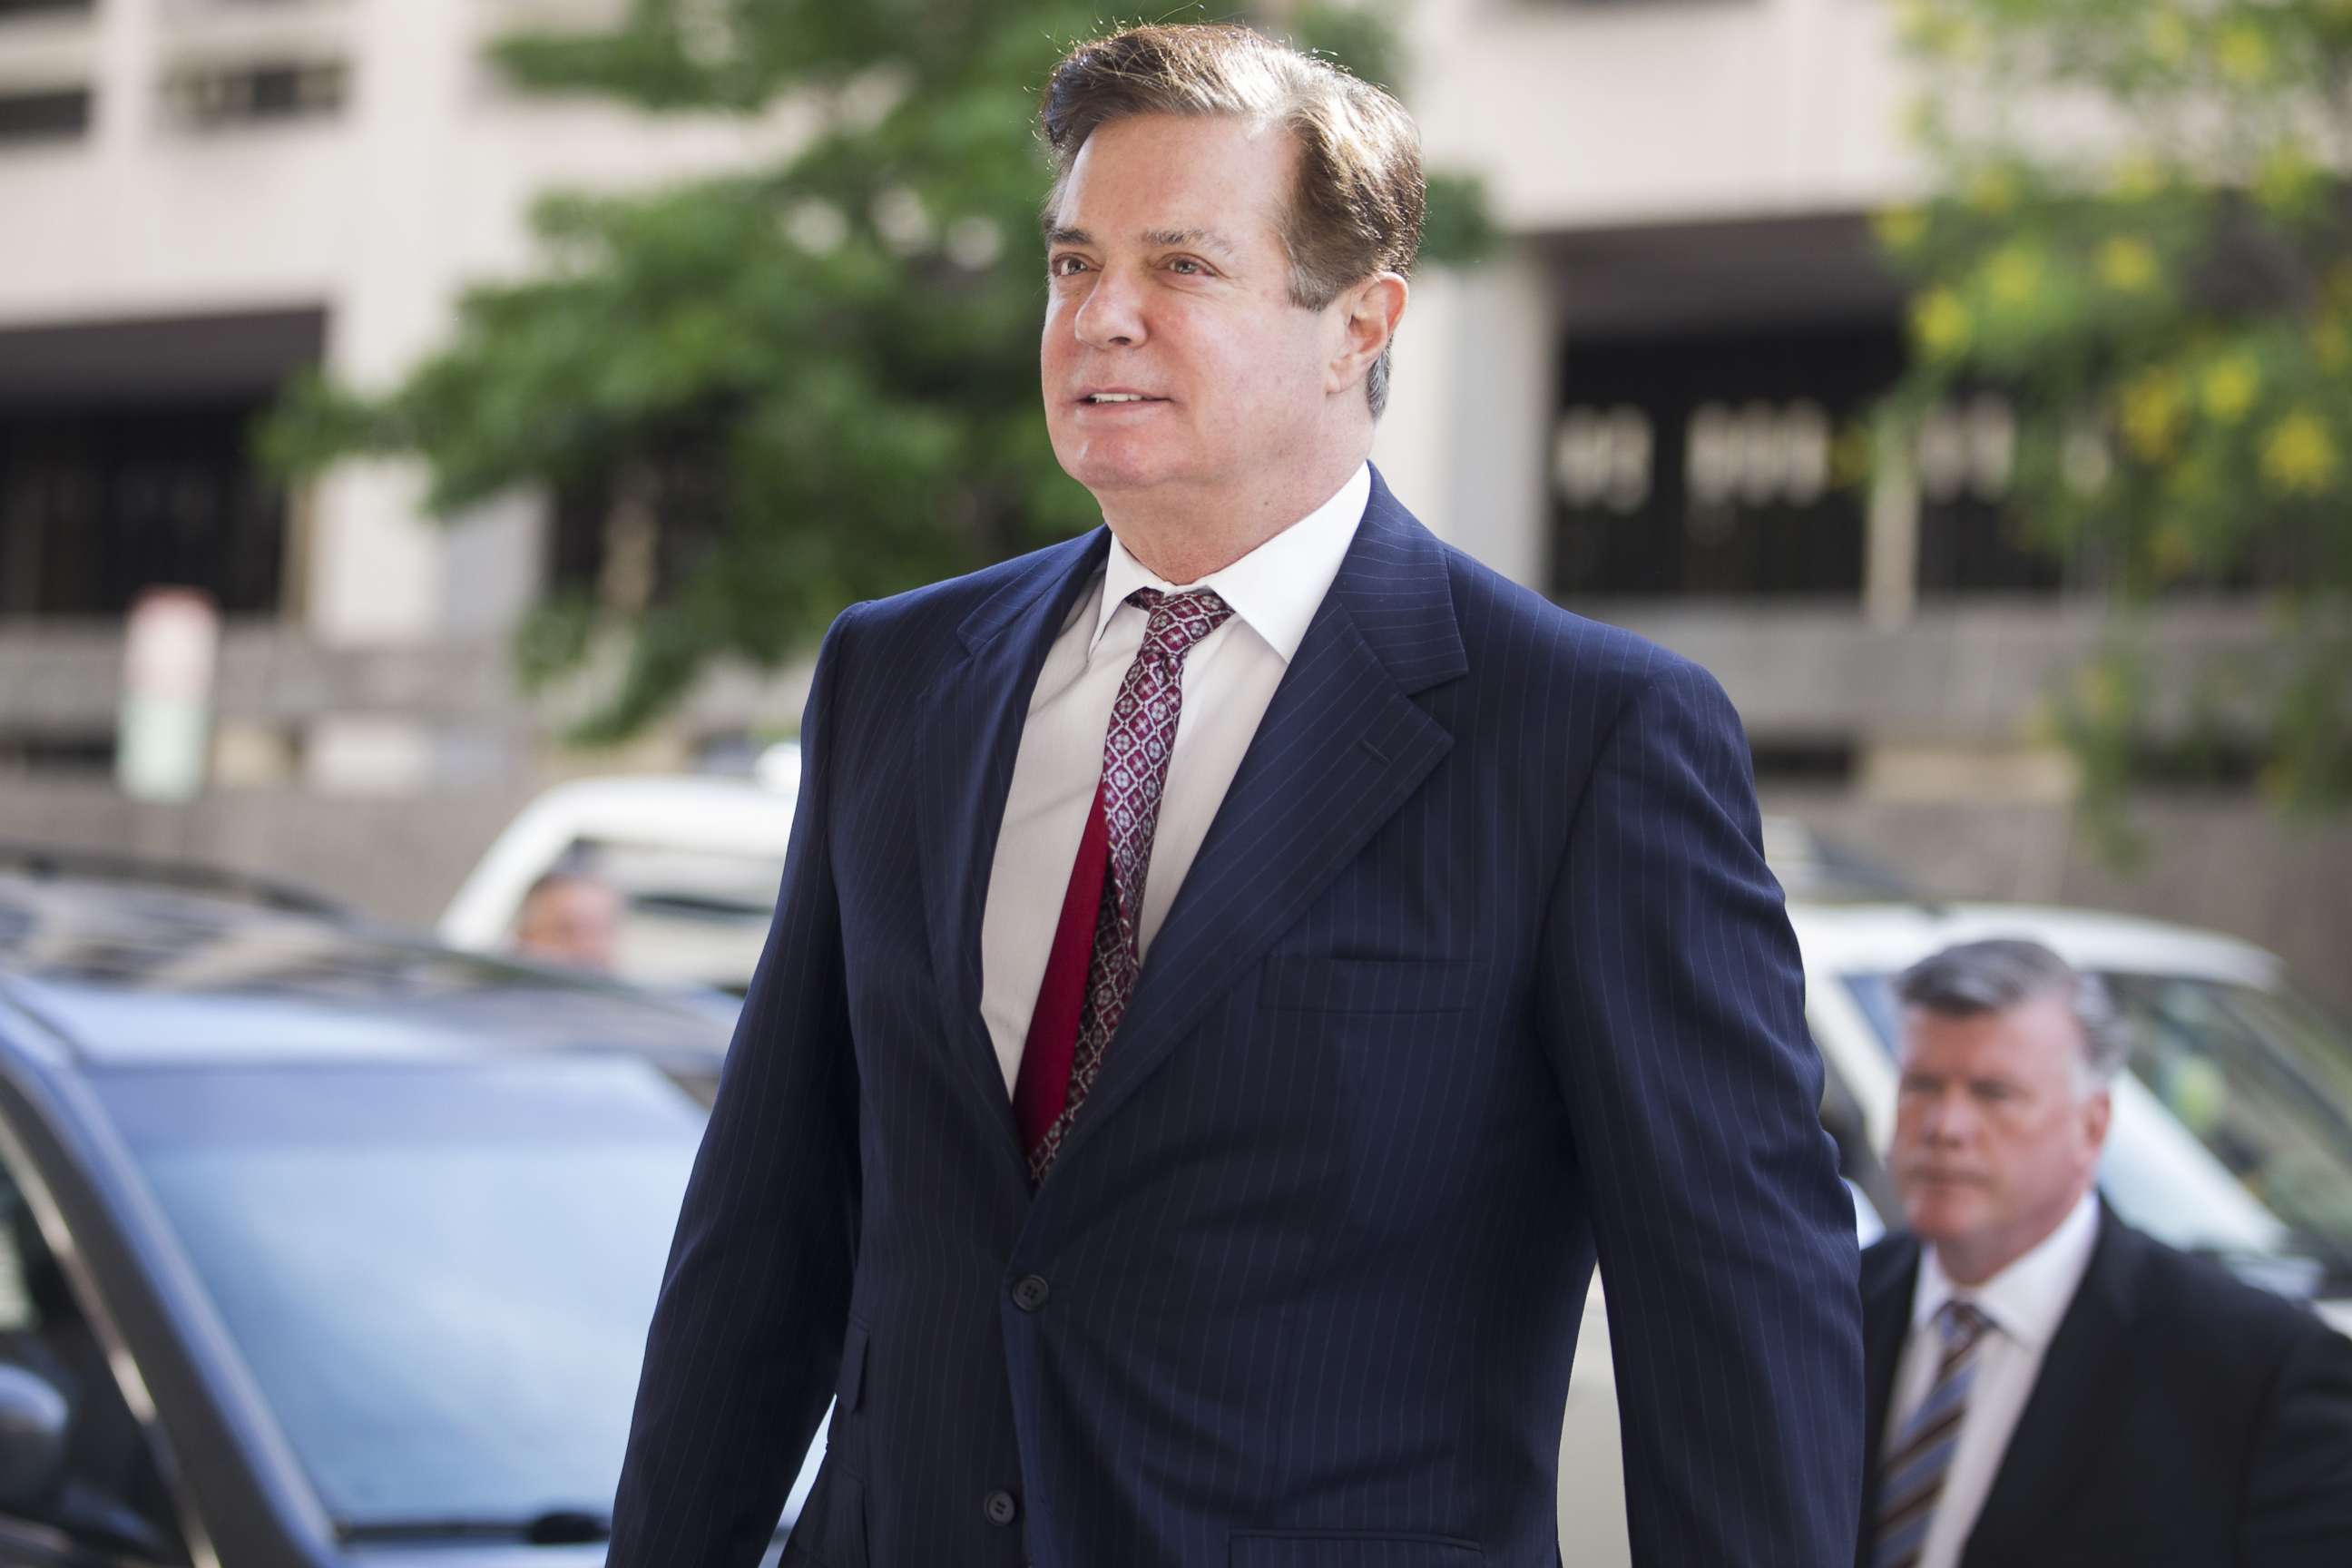 PHOTO: Paul Manafort, former campaign manager for Donald Trump, arrives at federal court in Washington,, June 15, 2018